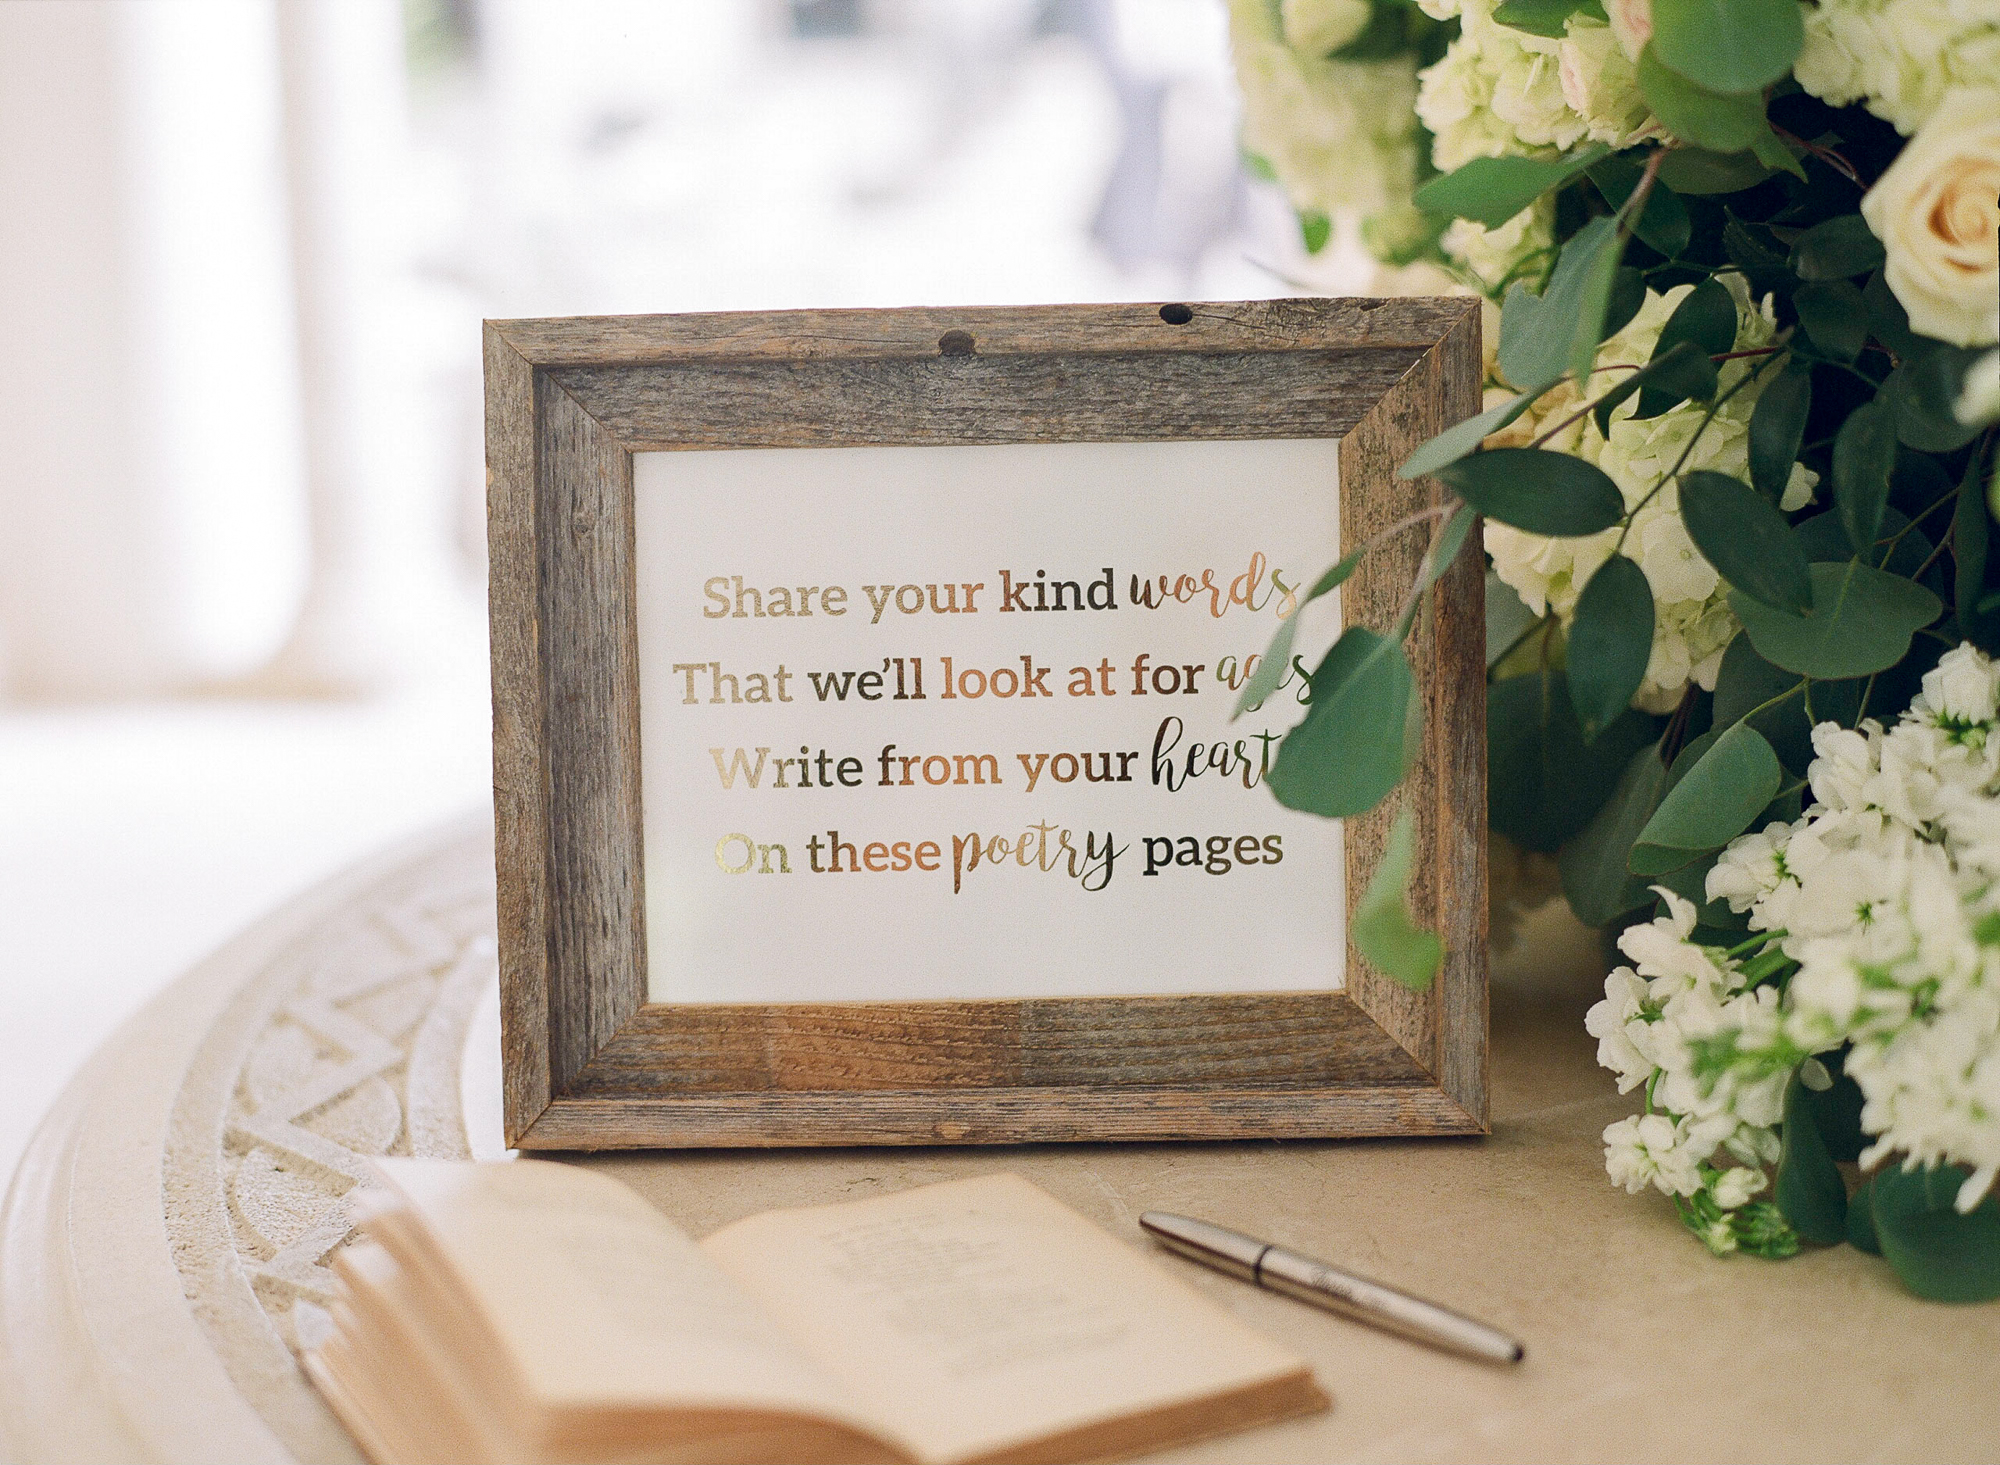 The wedding sign in book was an antique poetry book where guests would write their words of wisdom and well wishes for the bride and groom